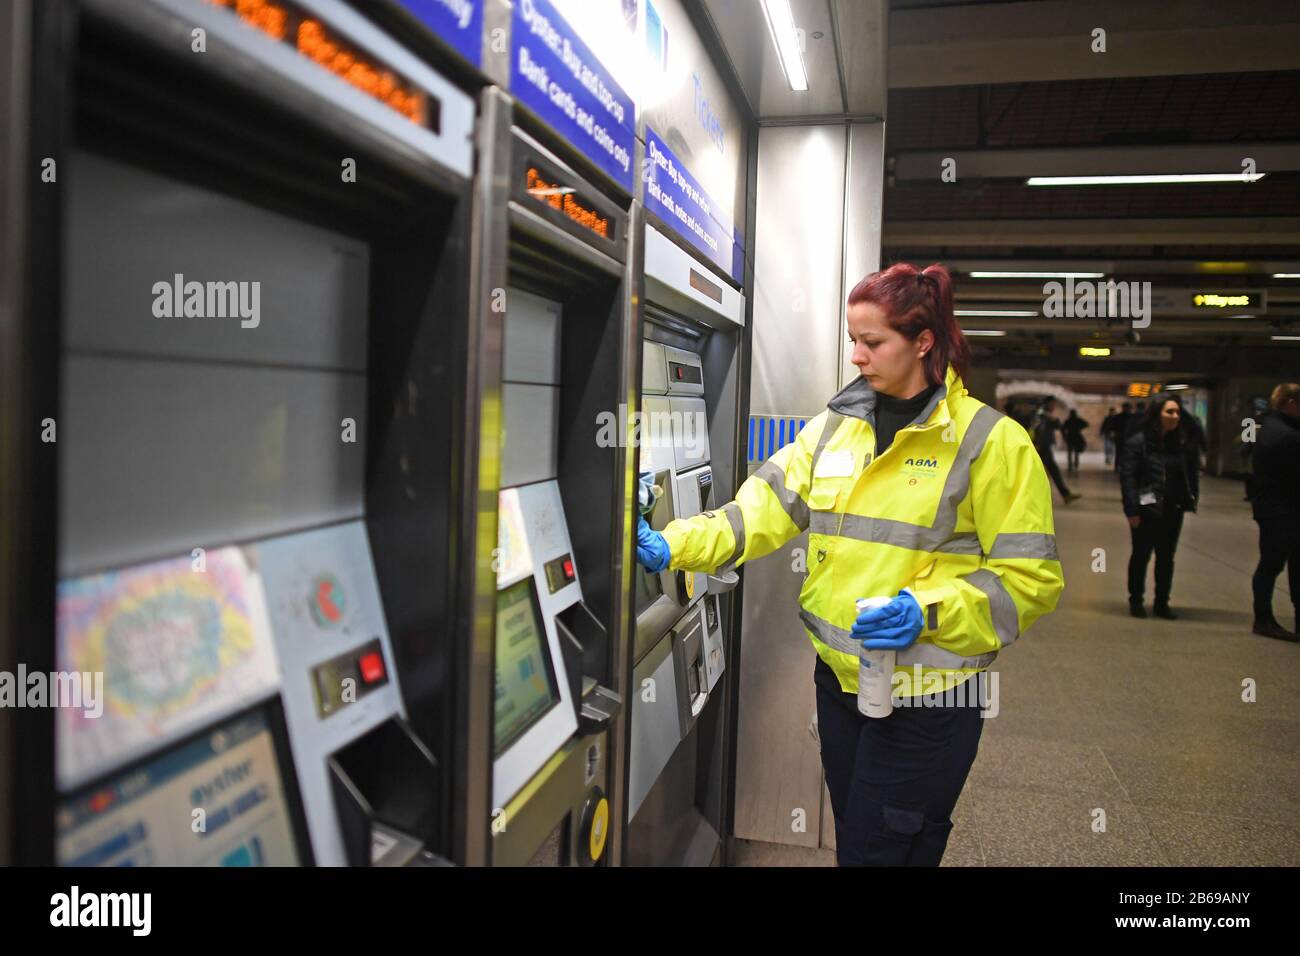 A member of staff at London Bridge station undertakes enhanced cleaning procedures that Transport for London (TfL) have introduced across the network in an effort to prevent the spread of coronavirus. Stock Photo